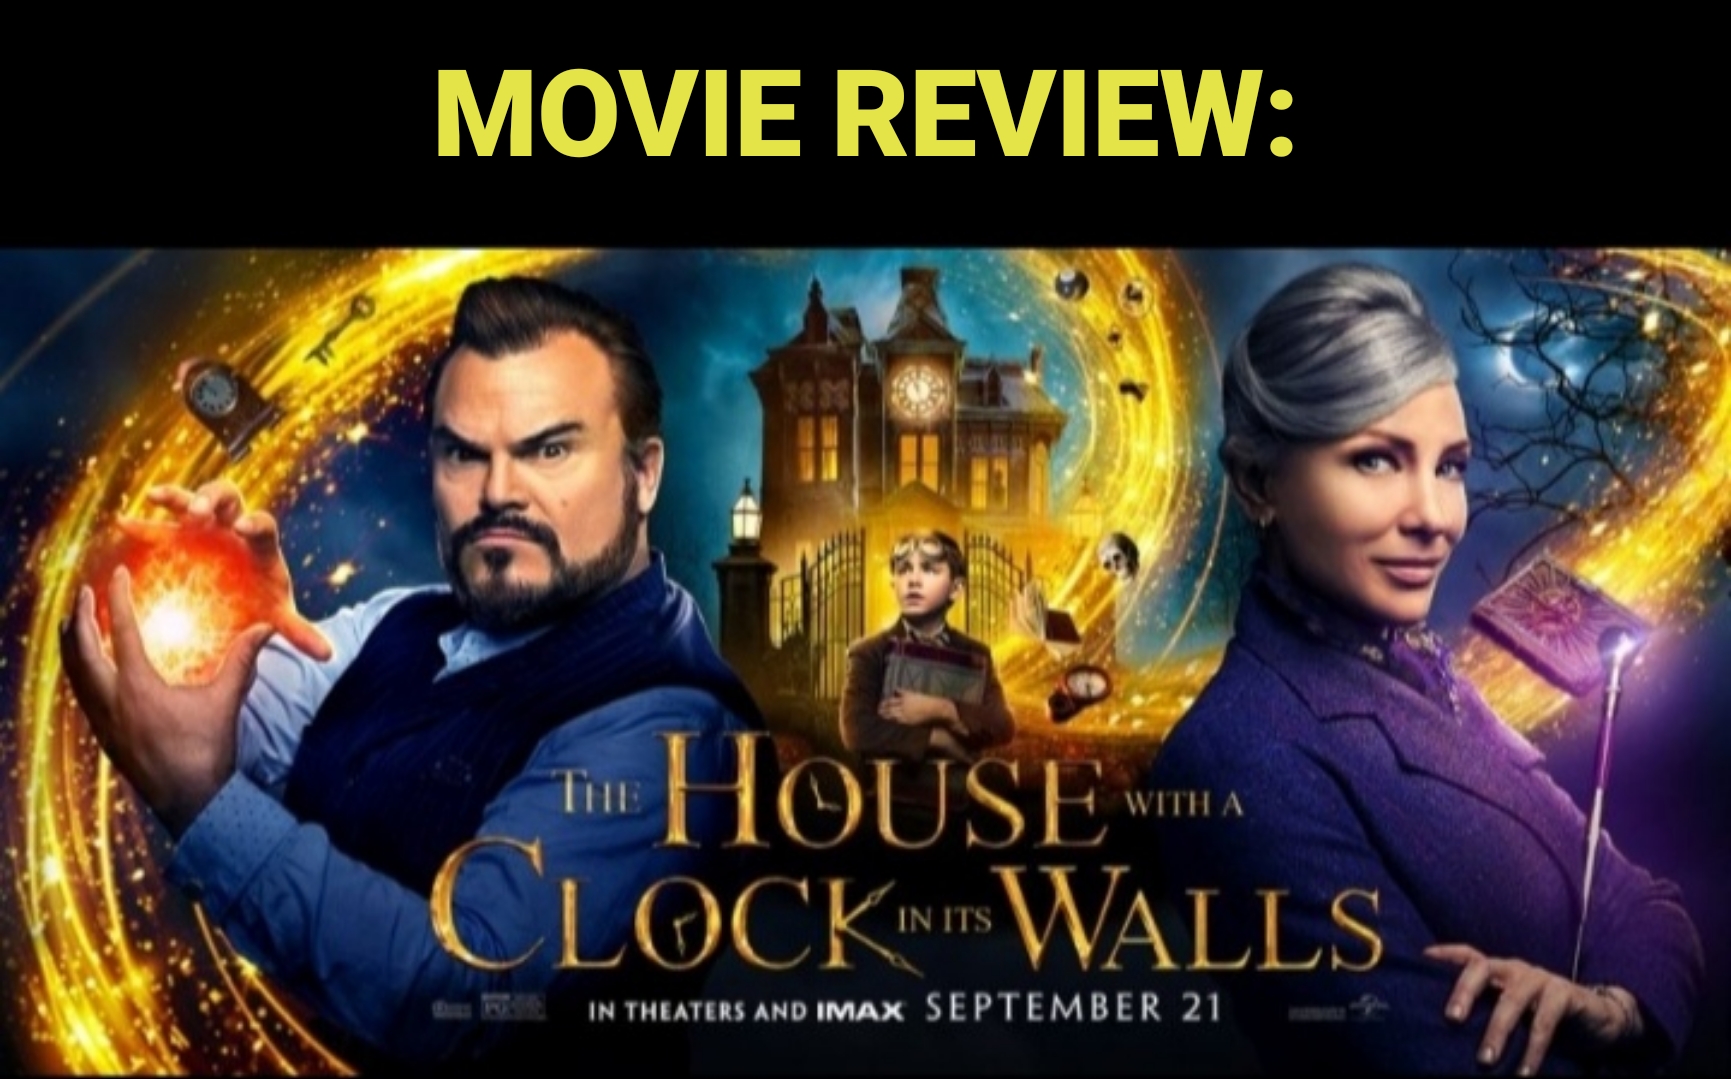 Movie Review: The house with a clock in it’s wall